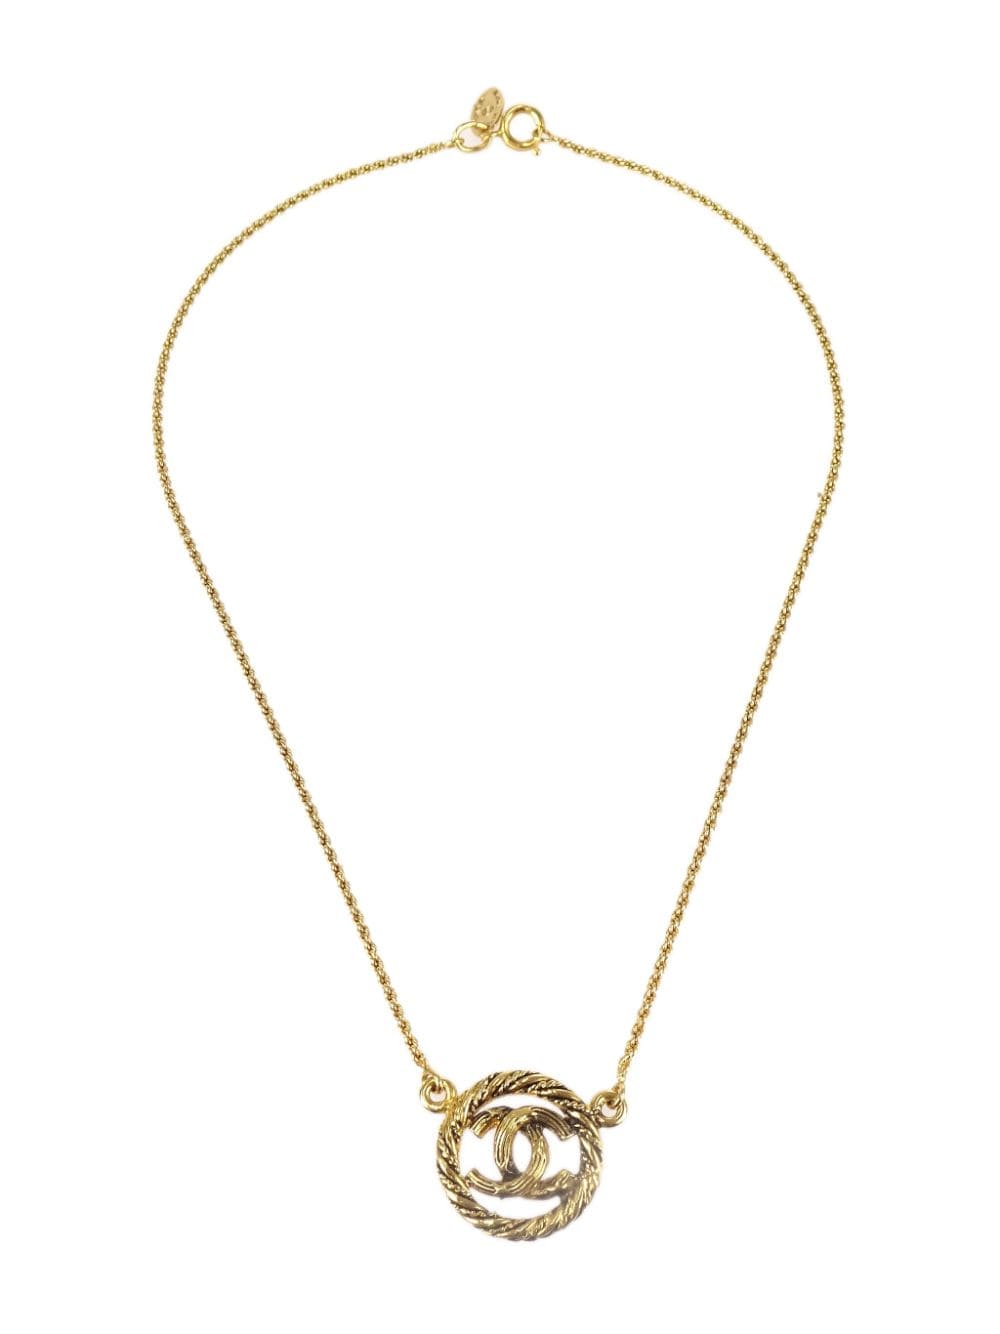 Pre-owned Chanel 1971-1980 Cut-out Cc Pendant Necklace In Gold